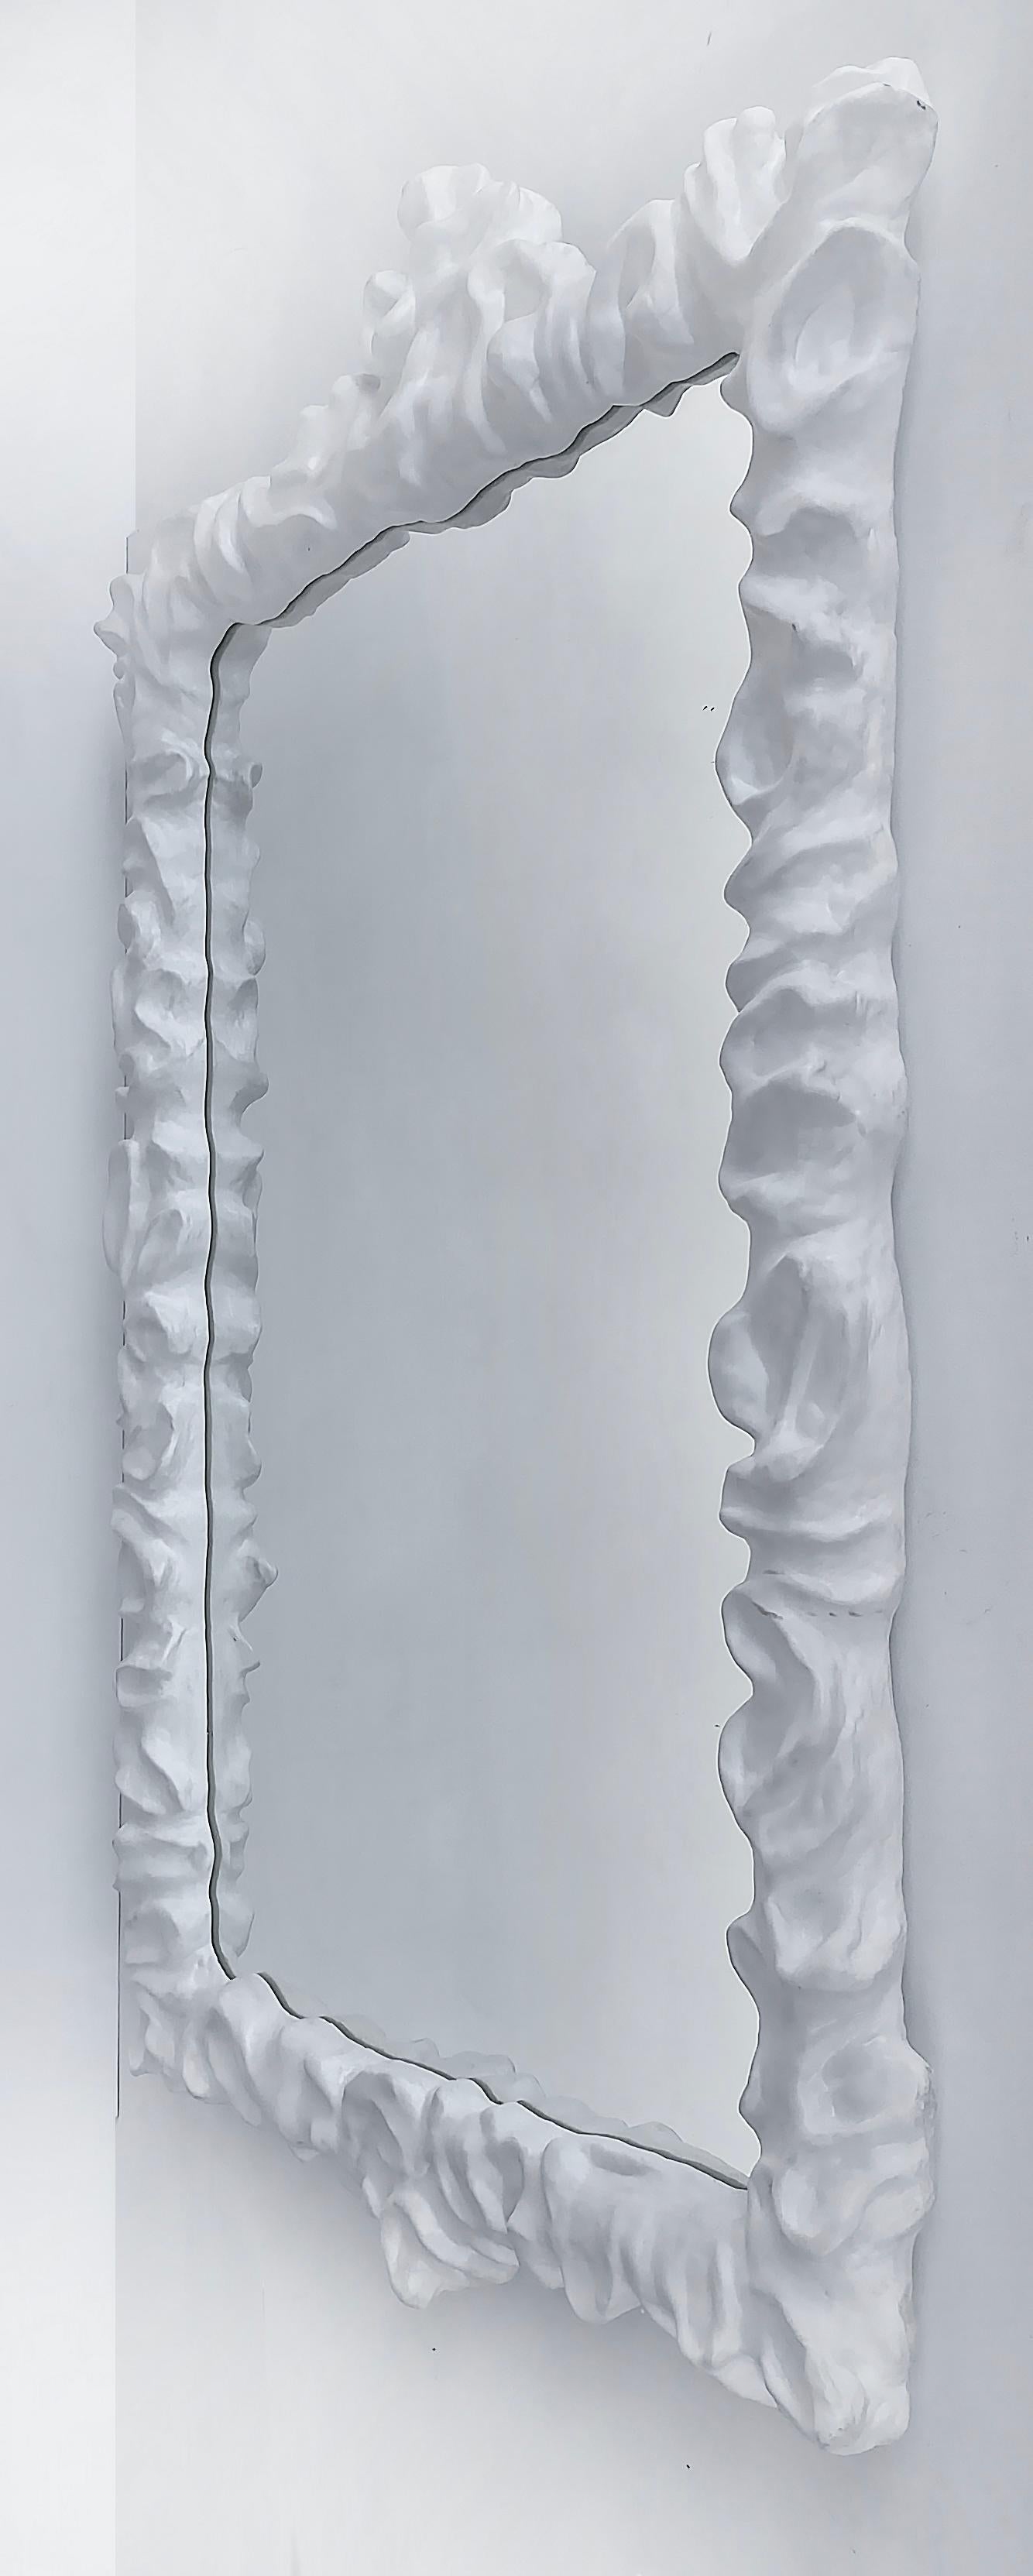 Overscale Oly Studios cast resin klemm mirror in a plaster finish.

Offered for sale is the Klemm mirror in cast resin by Oly Studios. Oly makes contemporary decor objects that are durable and transitional in their designs. The mirror has the look